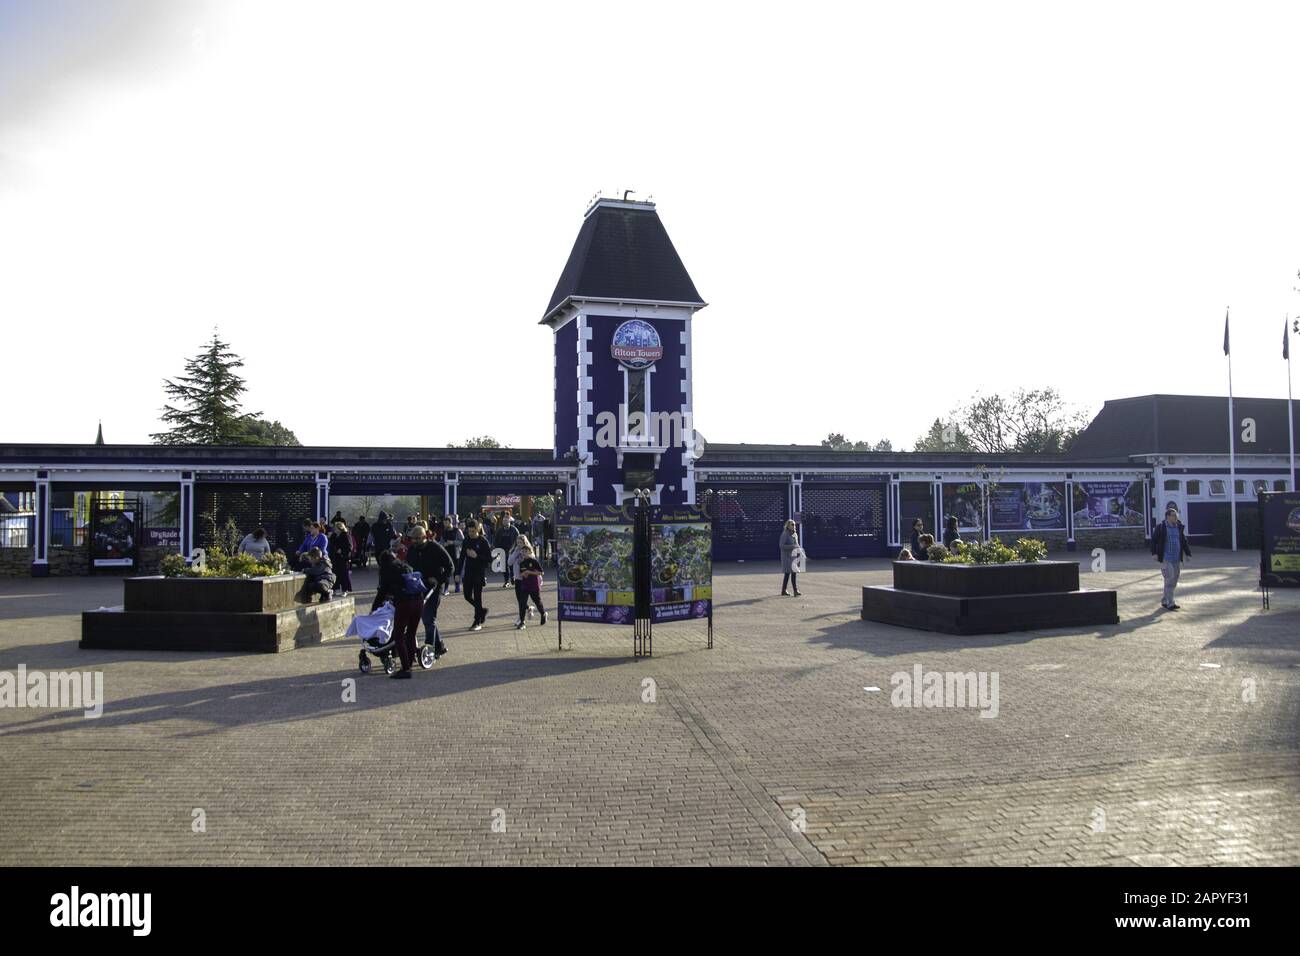 ALTON, UNITED KINGDOM - Apr 06, 2019: Entrance to Alton Towers Resort. Is a theme park resort located in Staffordshire, England. Is operated by Merlin Stock Photo